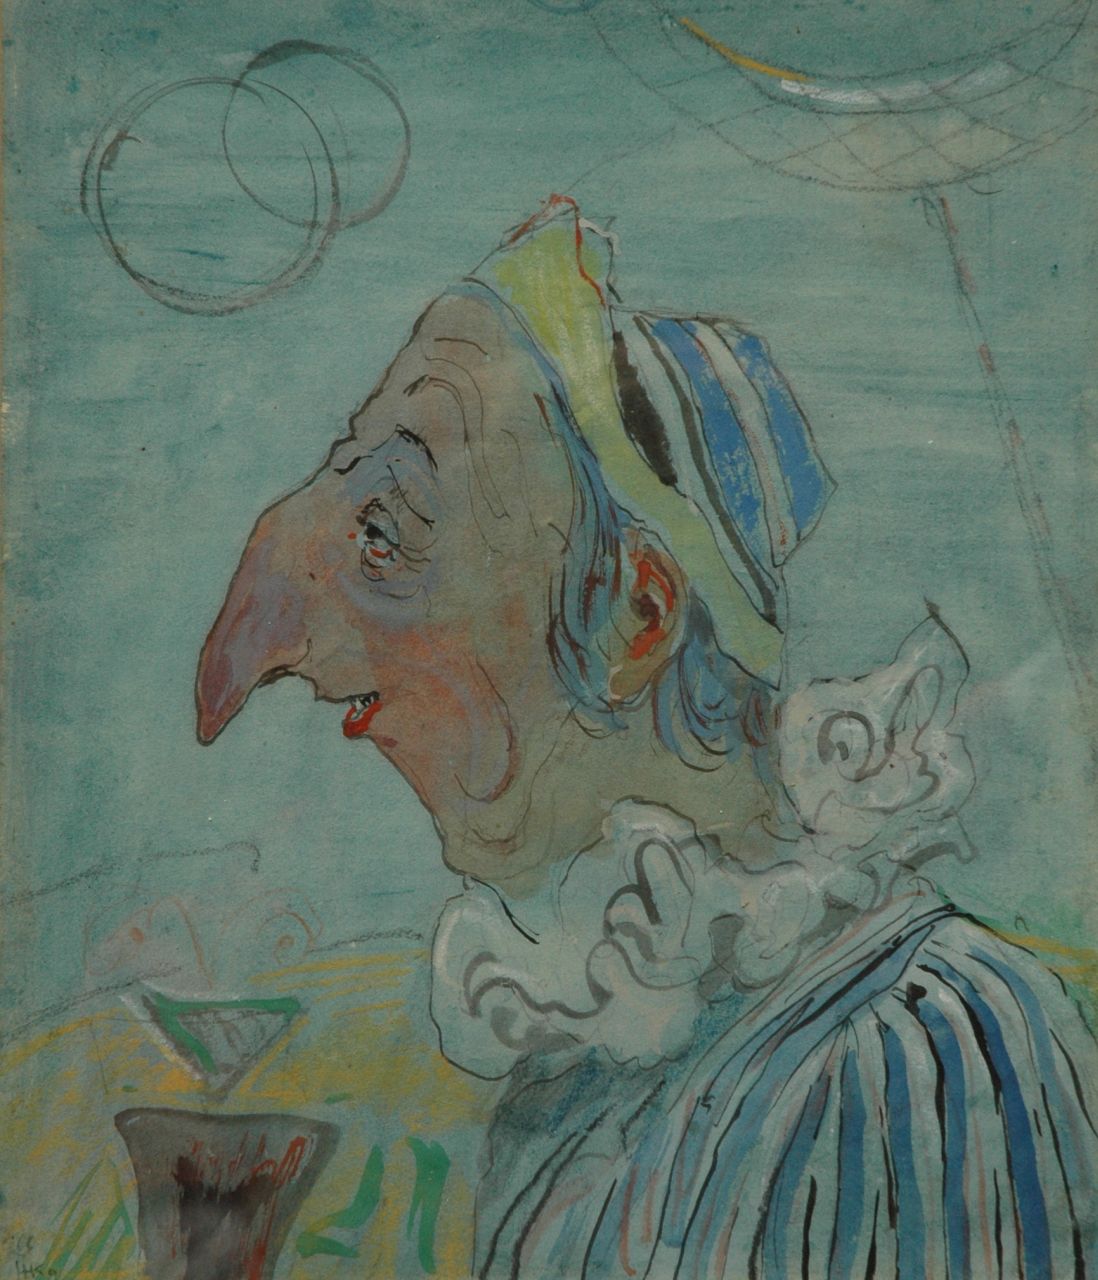 Kamerlingh Onnes H.H.  | 'Harm' Henrick Kamerlingh Onnes, A clown, pencil, pen and watercolour on paper 27.0 x 22.8 cm, signed l.r. with monogram and dated '66